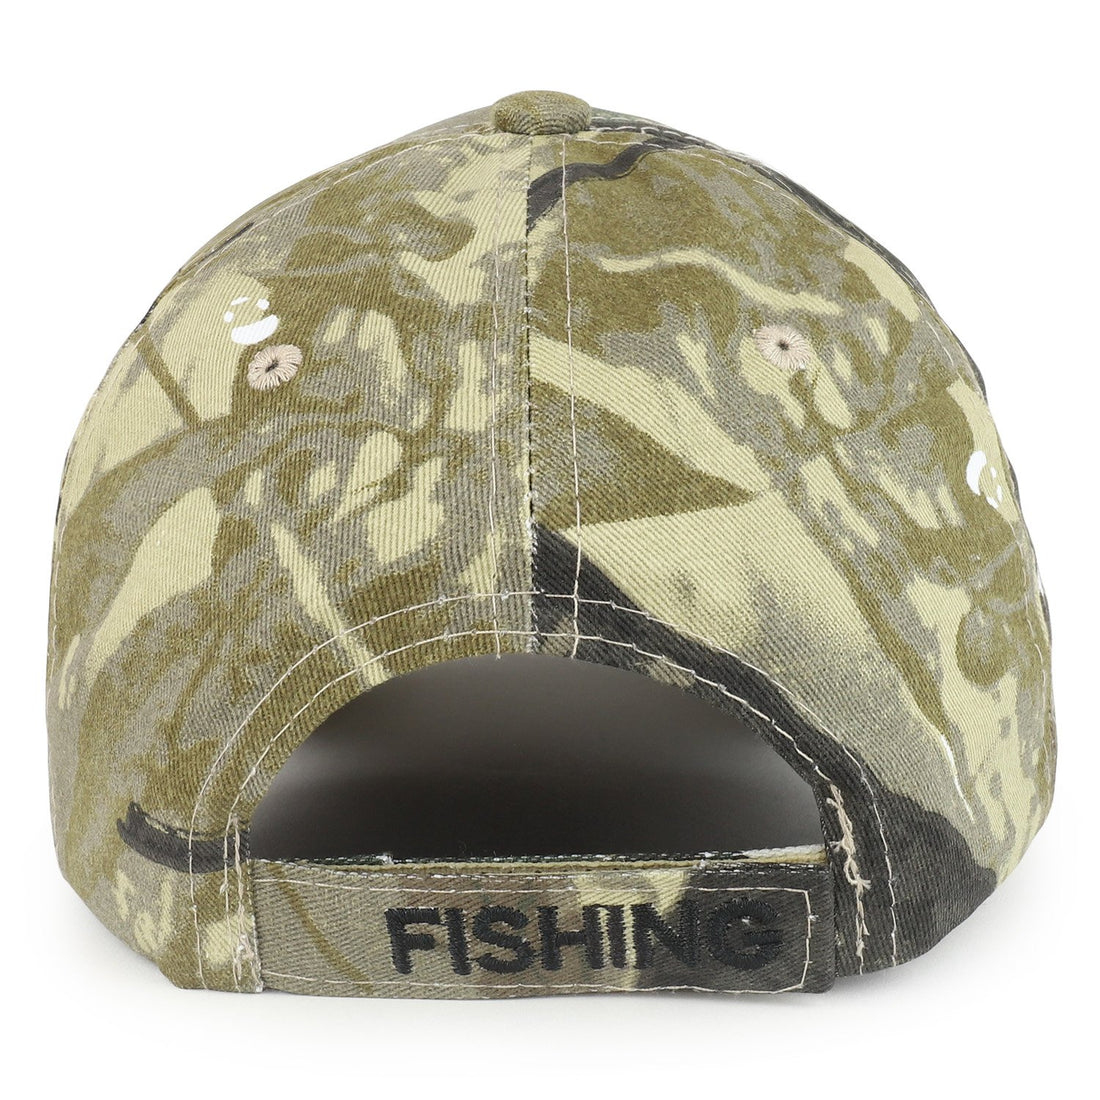 Trendy Apparel Shop Just Hook Up Fishing Outdoor Sports Embroidered Adjustable Baseball Cap Black